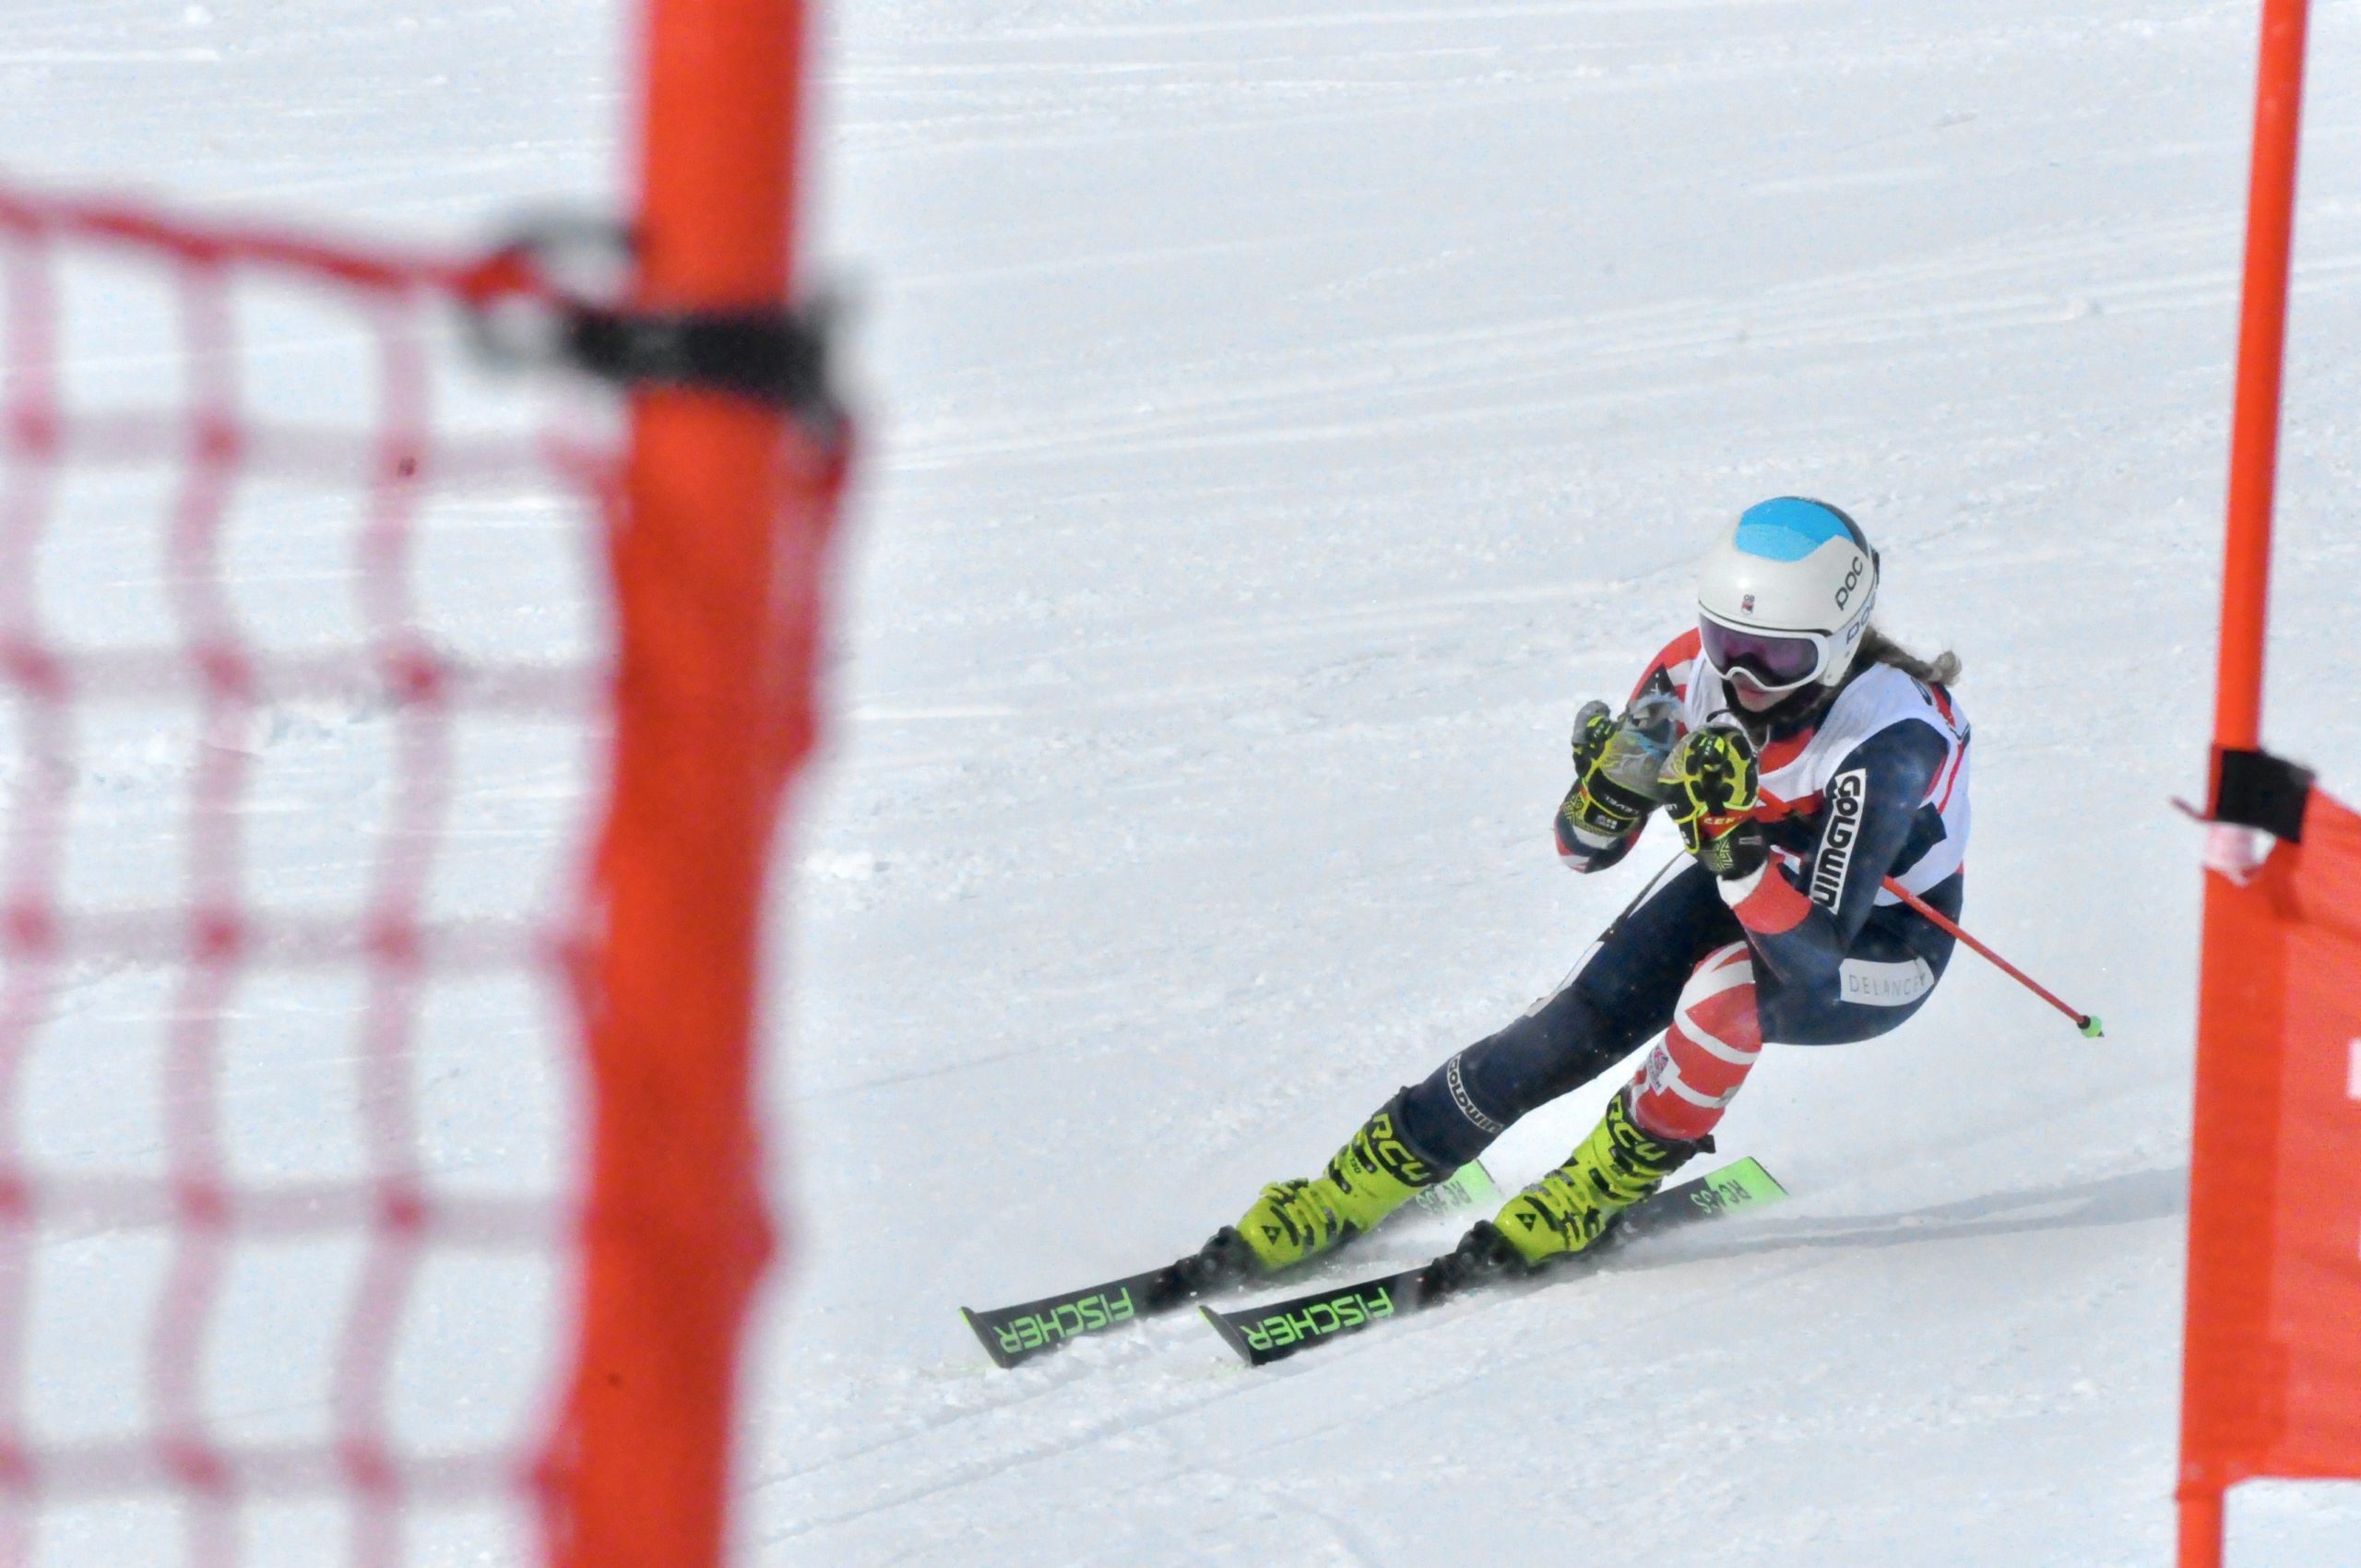 Anderson takes fourth GB Alpine Championships podium, Guigonnet named British Combined Champ